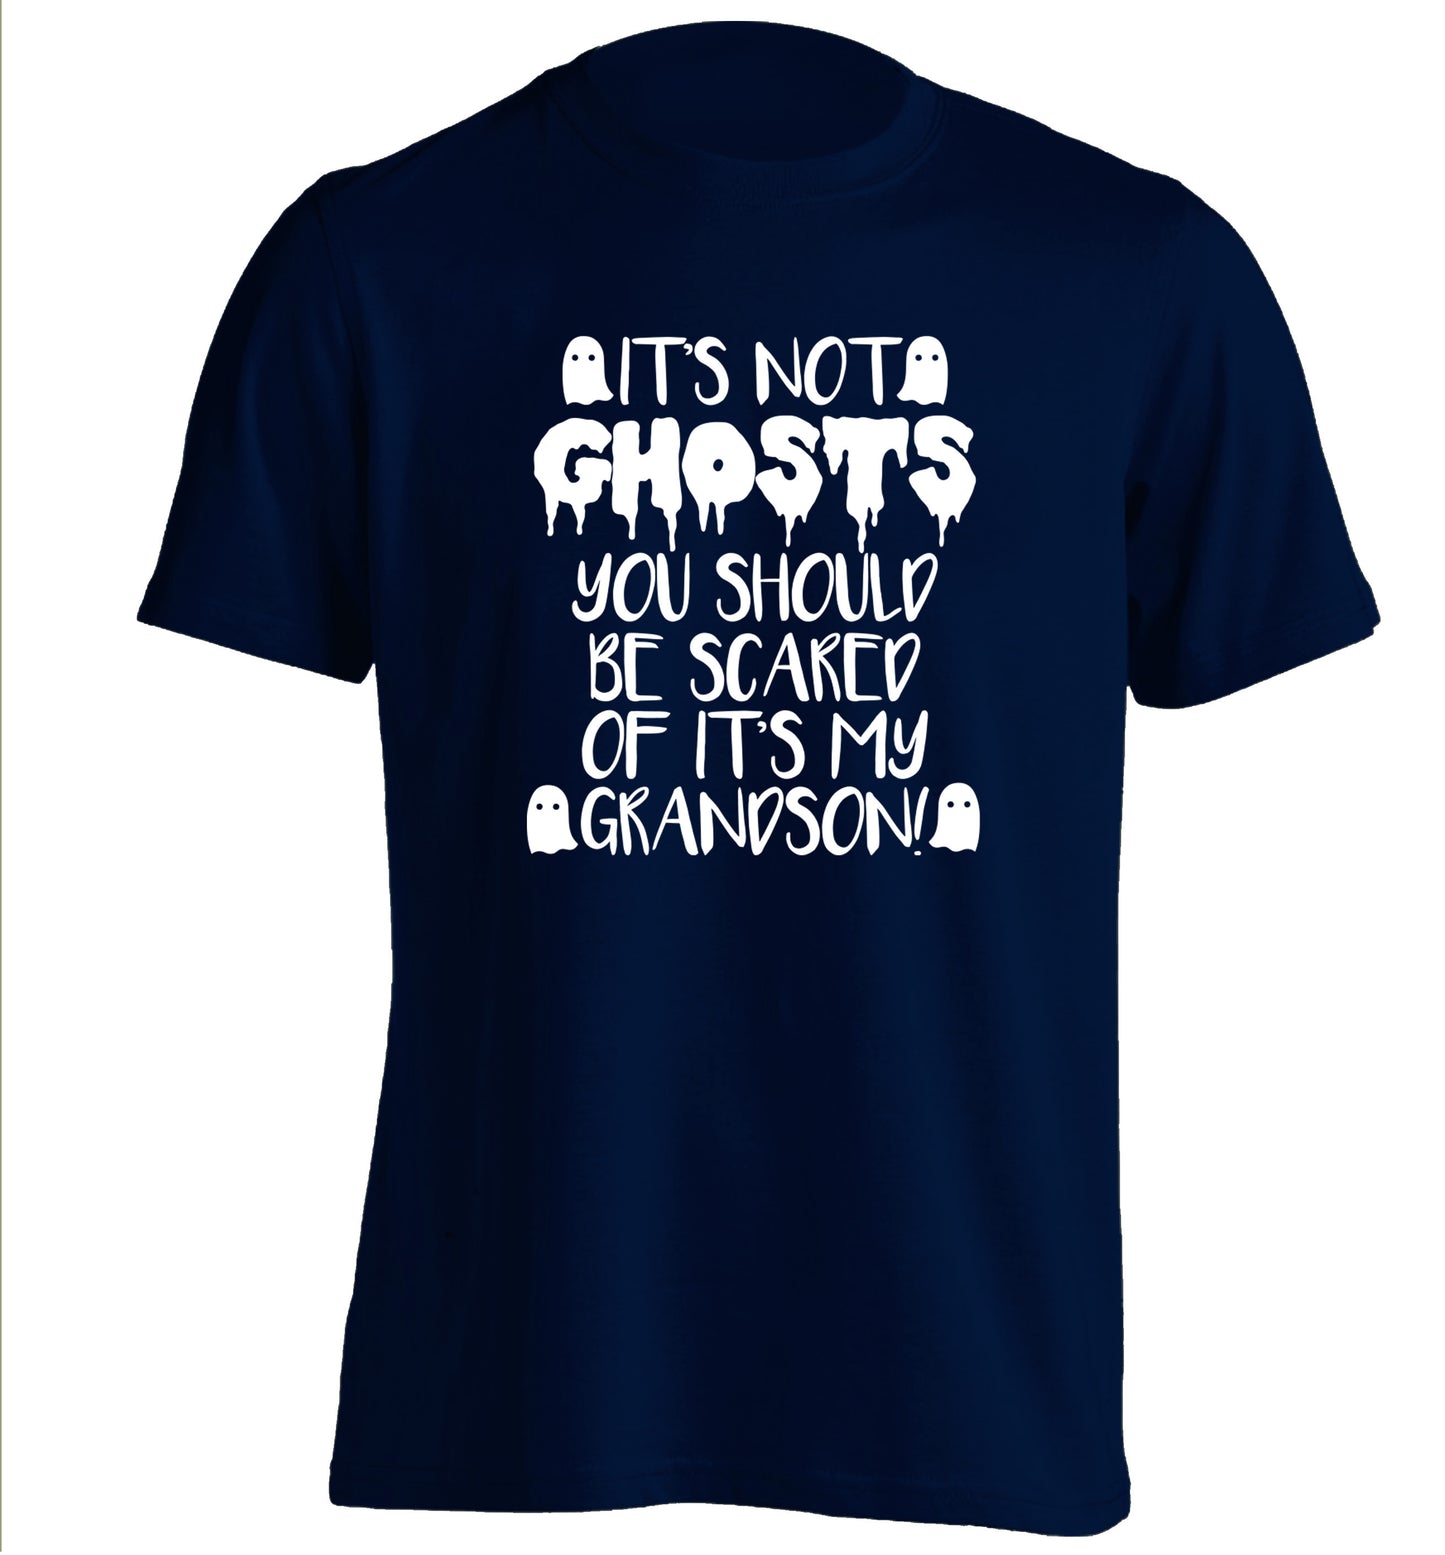 It's not ghosts you should be scared of it's my grandson! adults unisex navy Tshirt 2XL